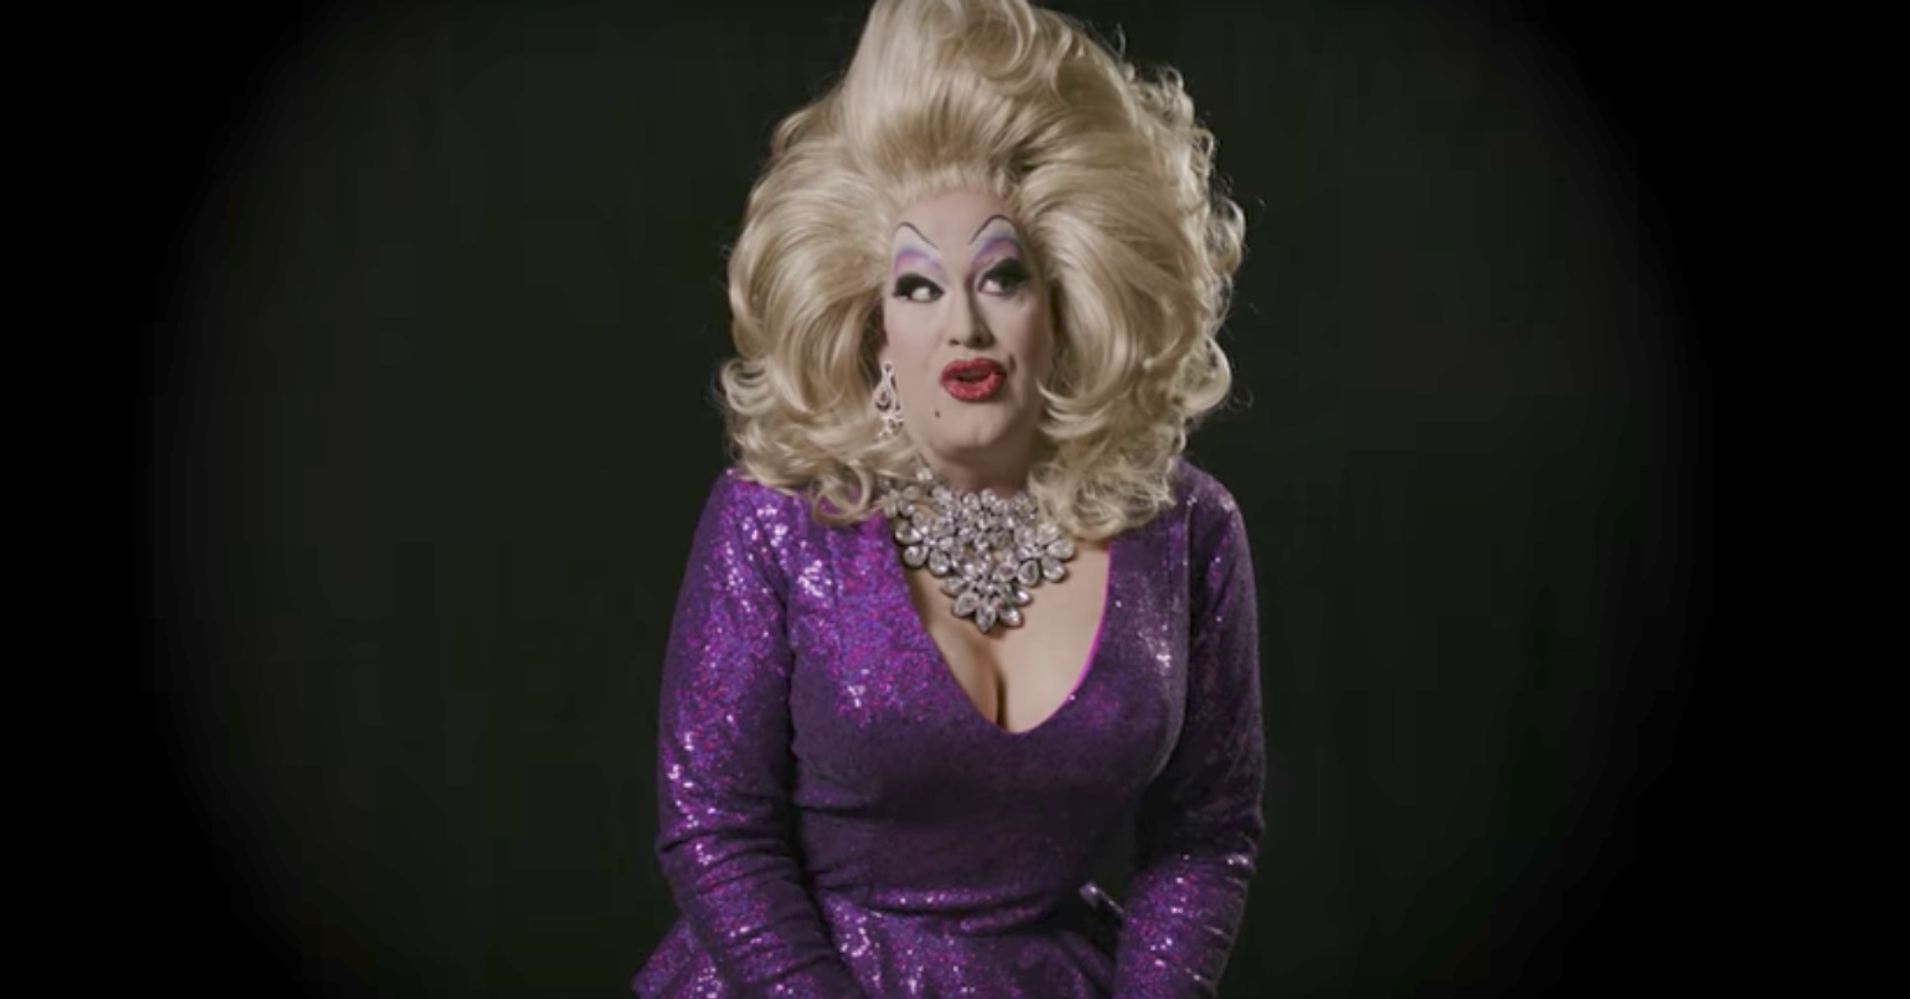 An American Drag Legend Opens About Her Journey To Authenticity | HuffPost